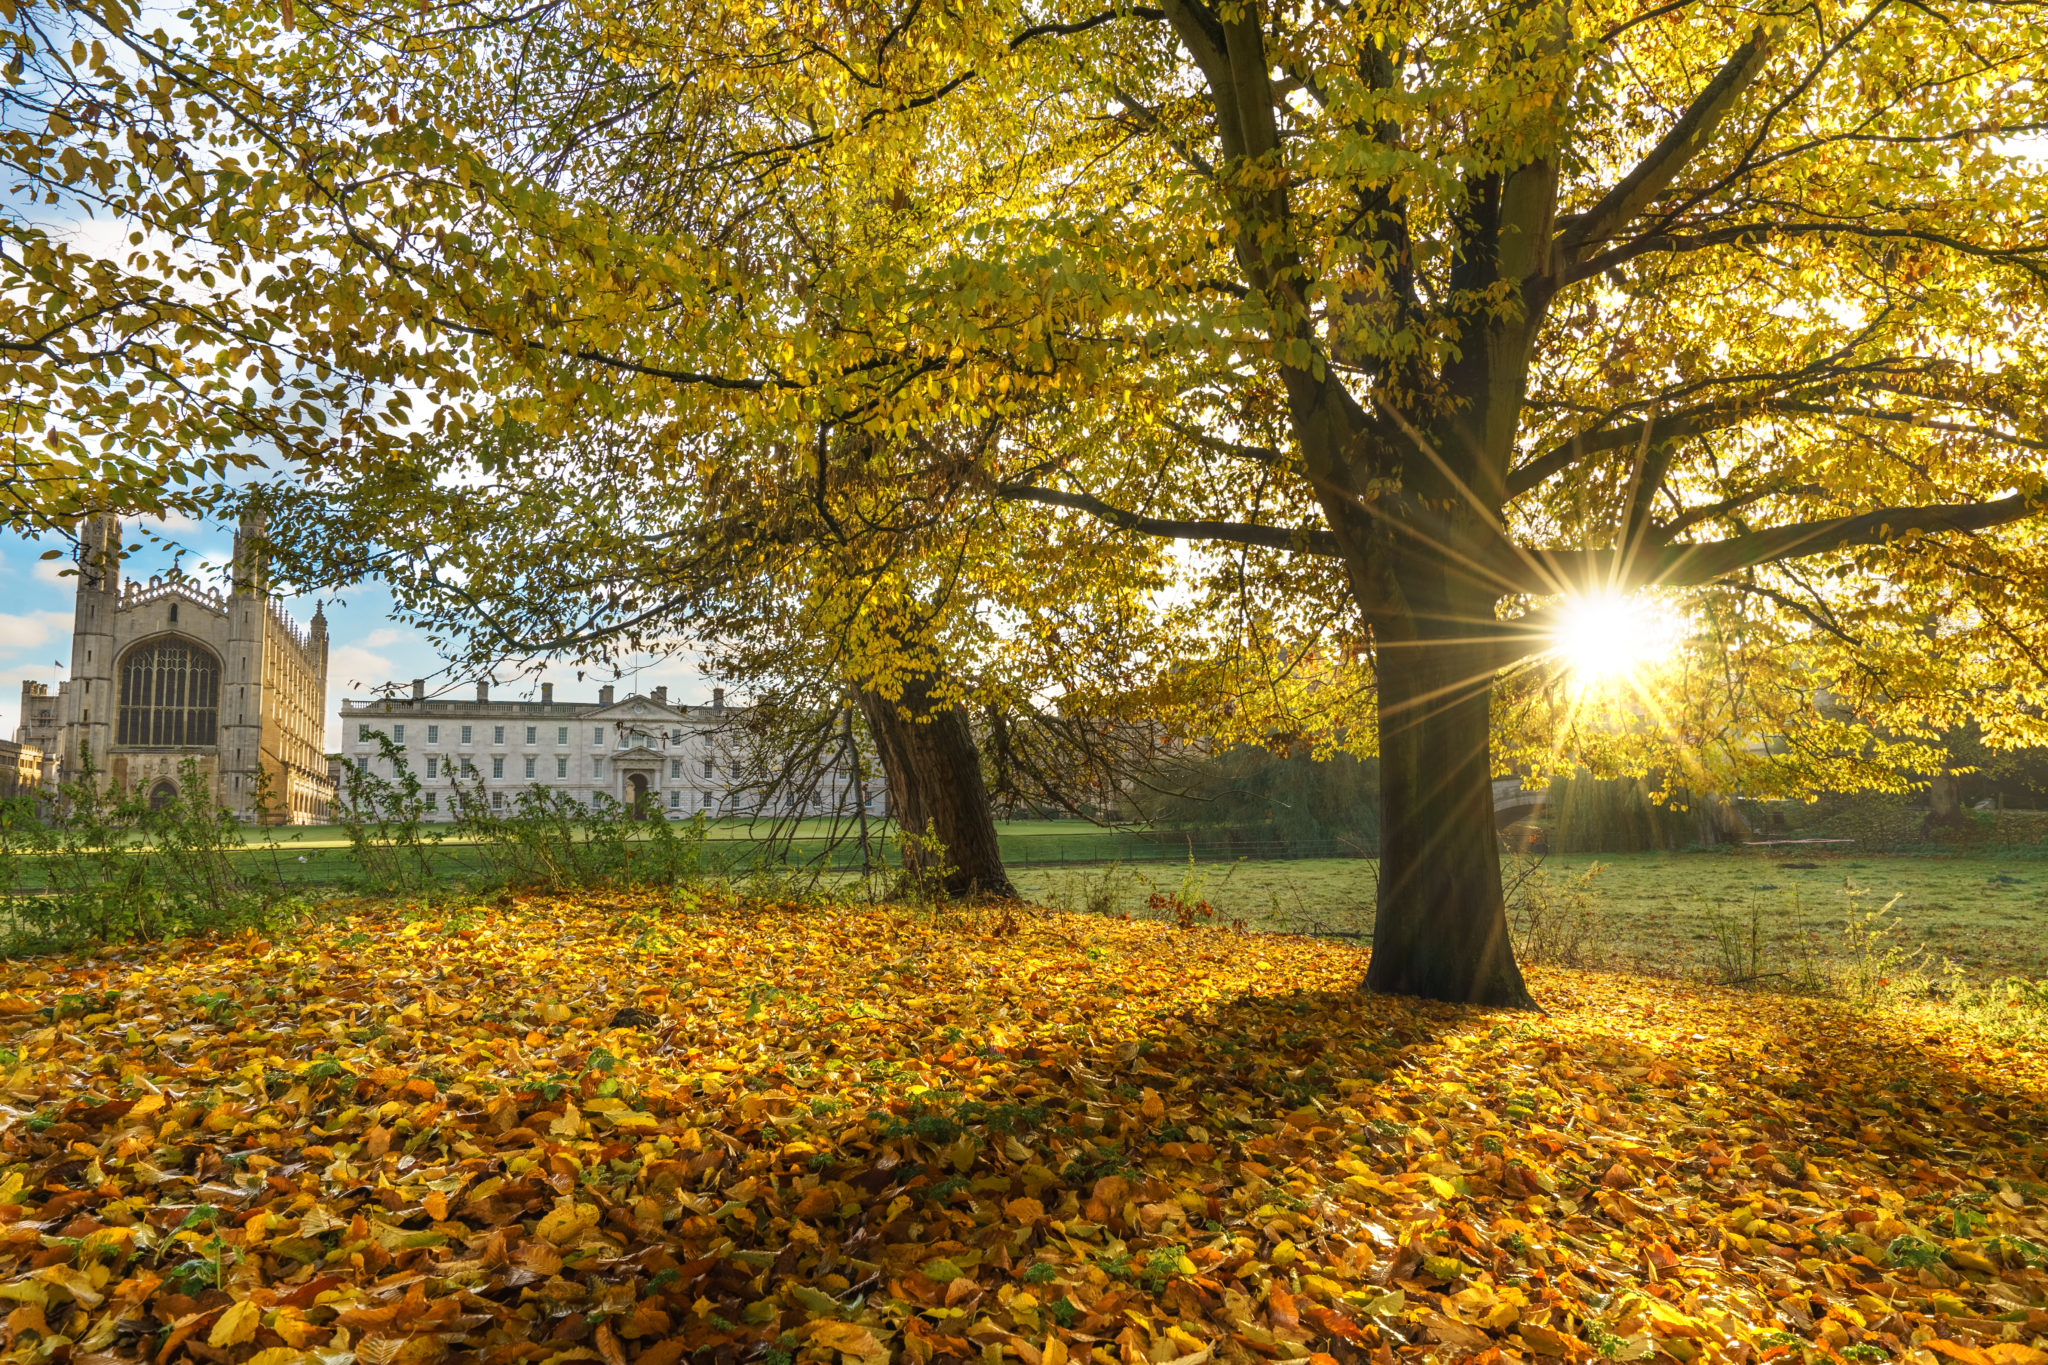 places to visit uk in autumn